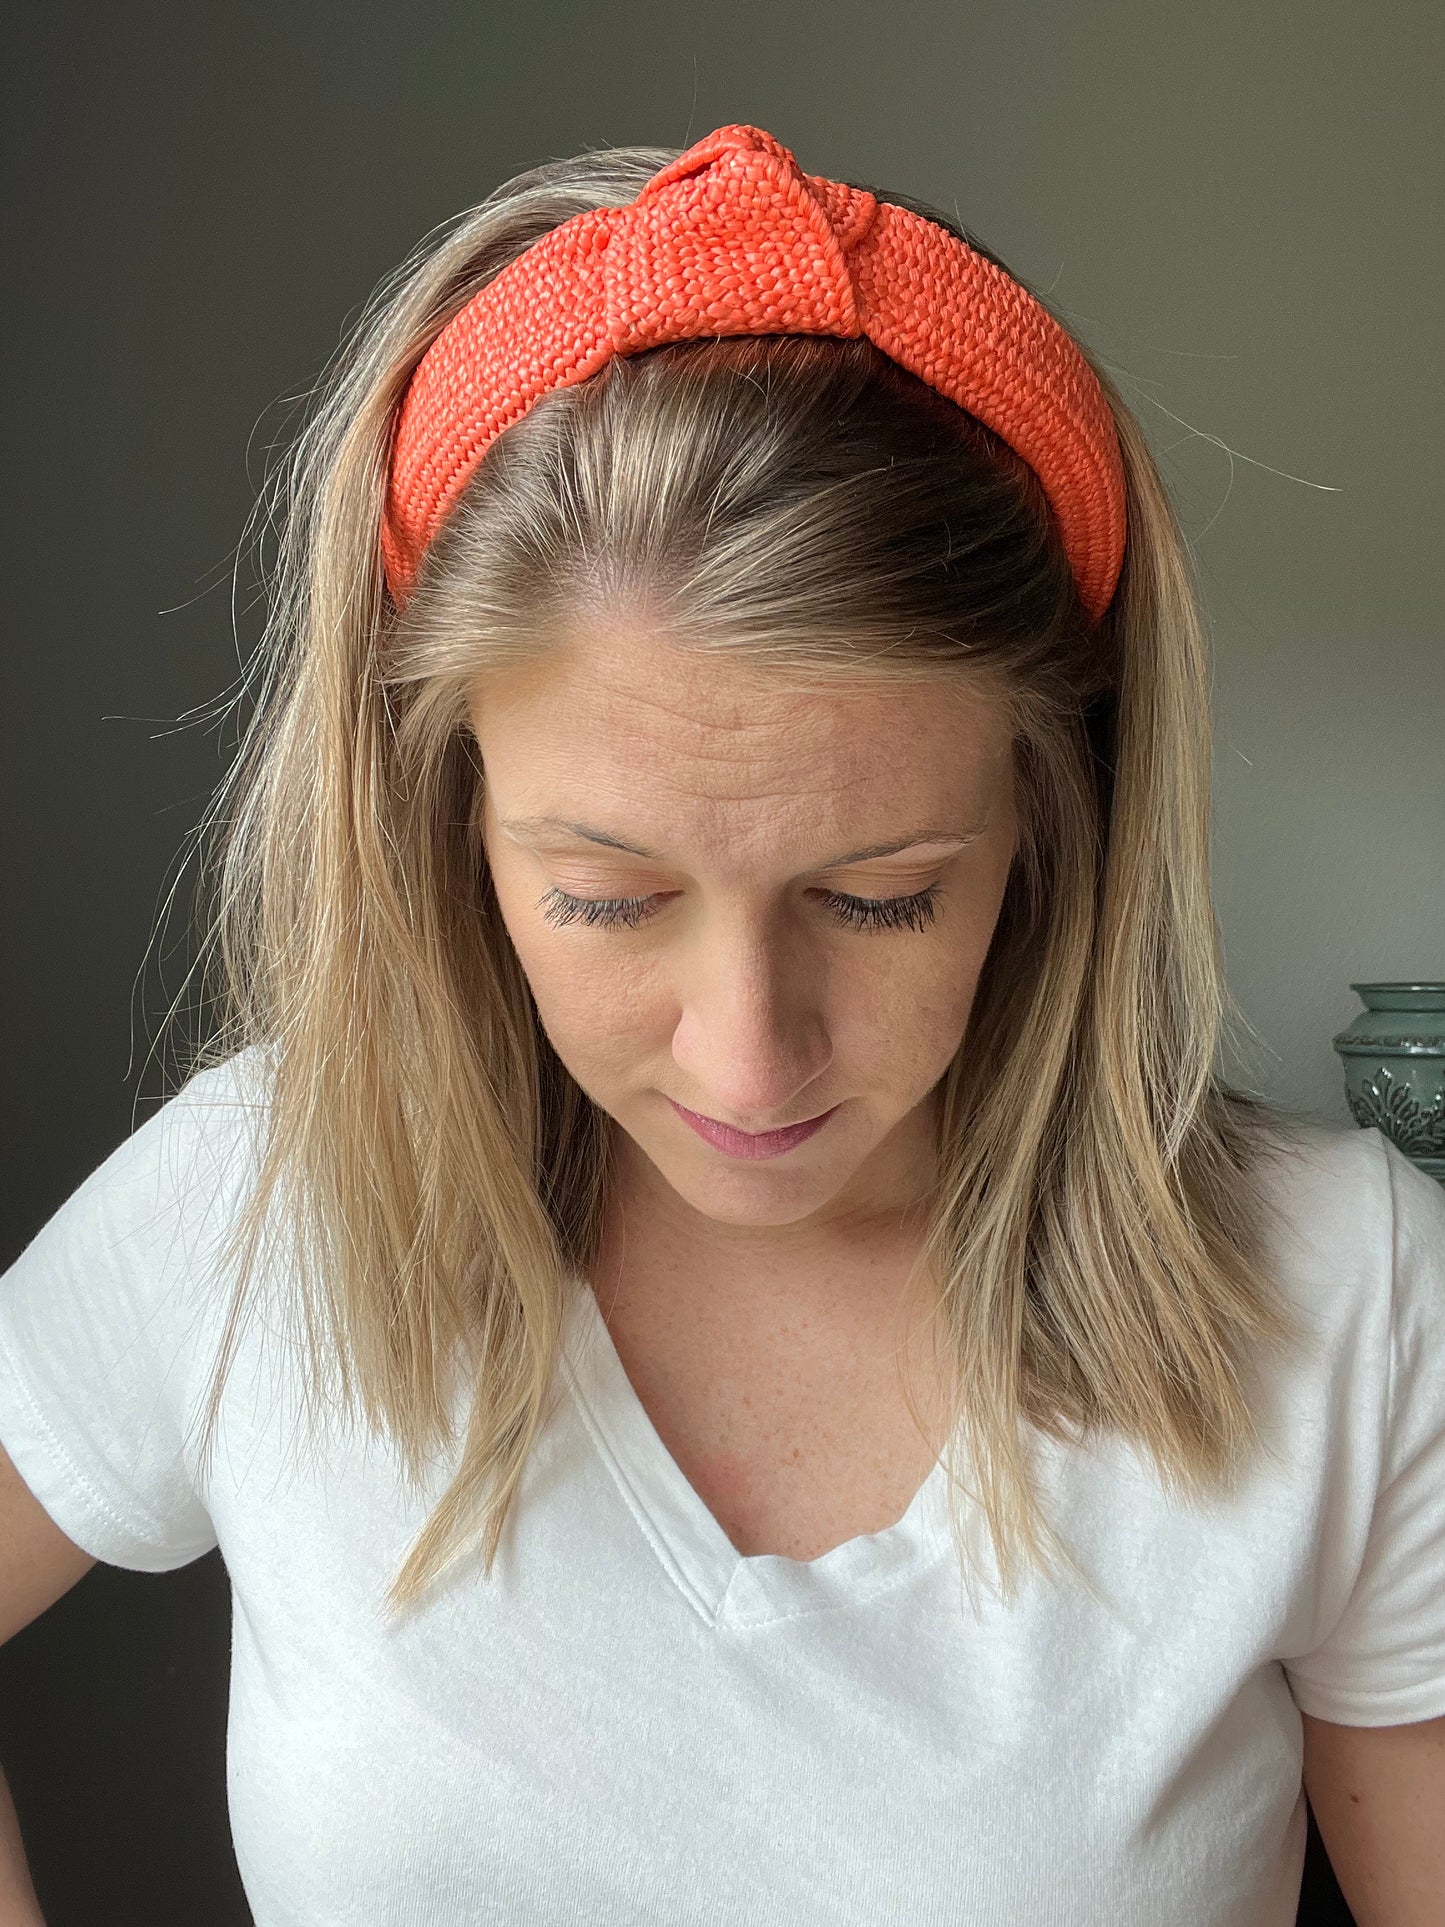 Coral knotted headband